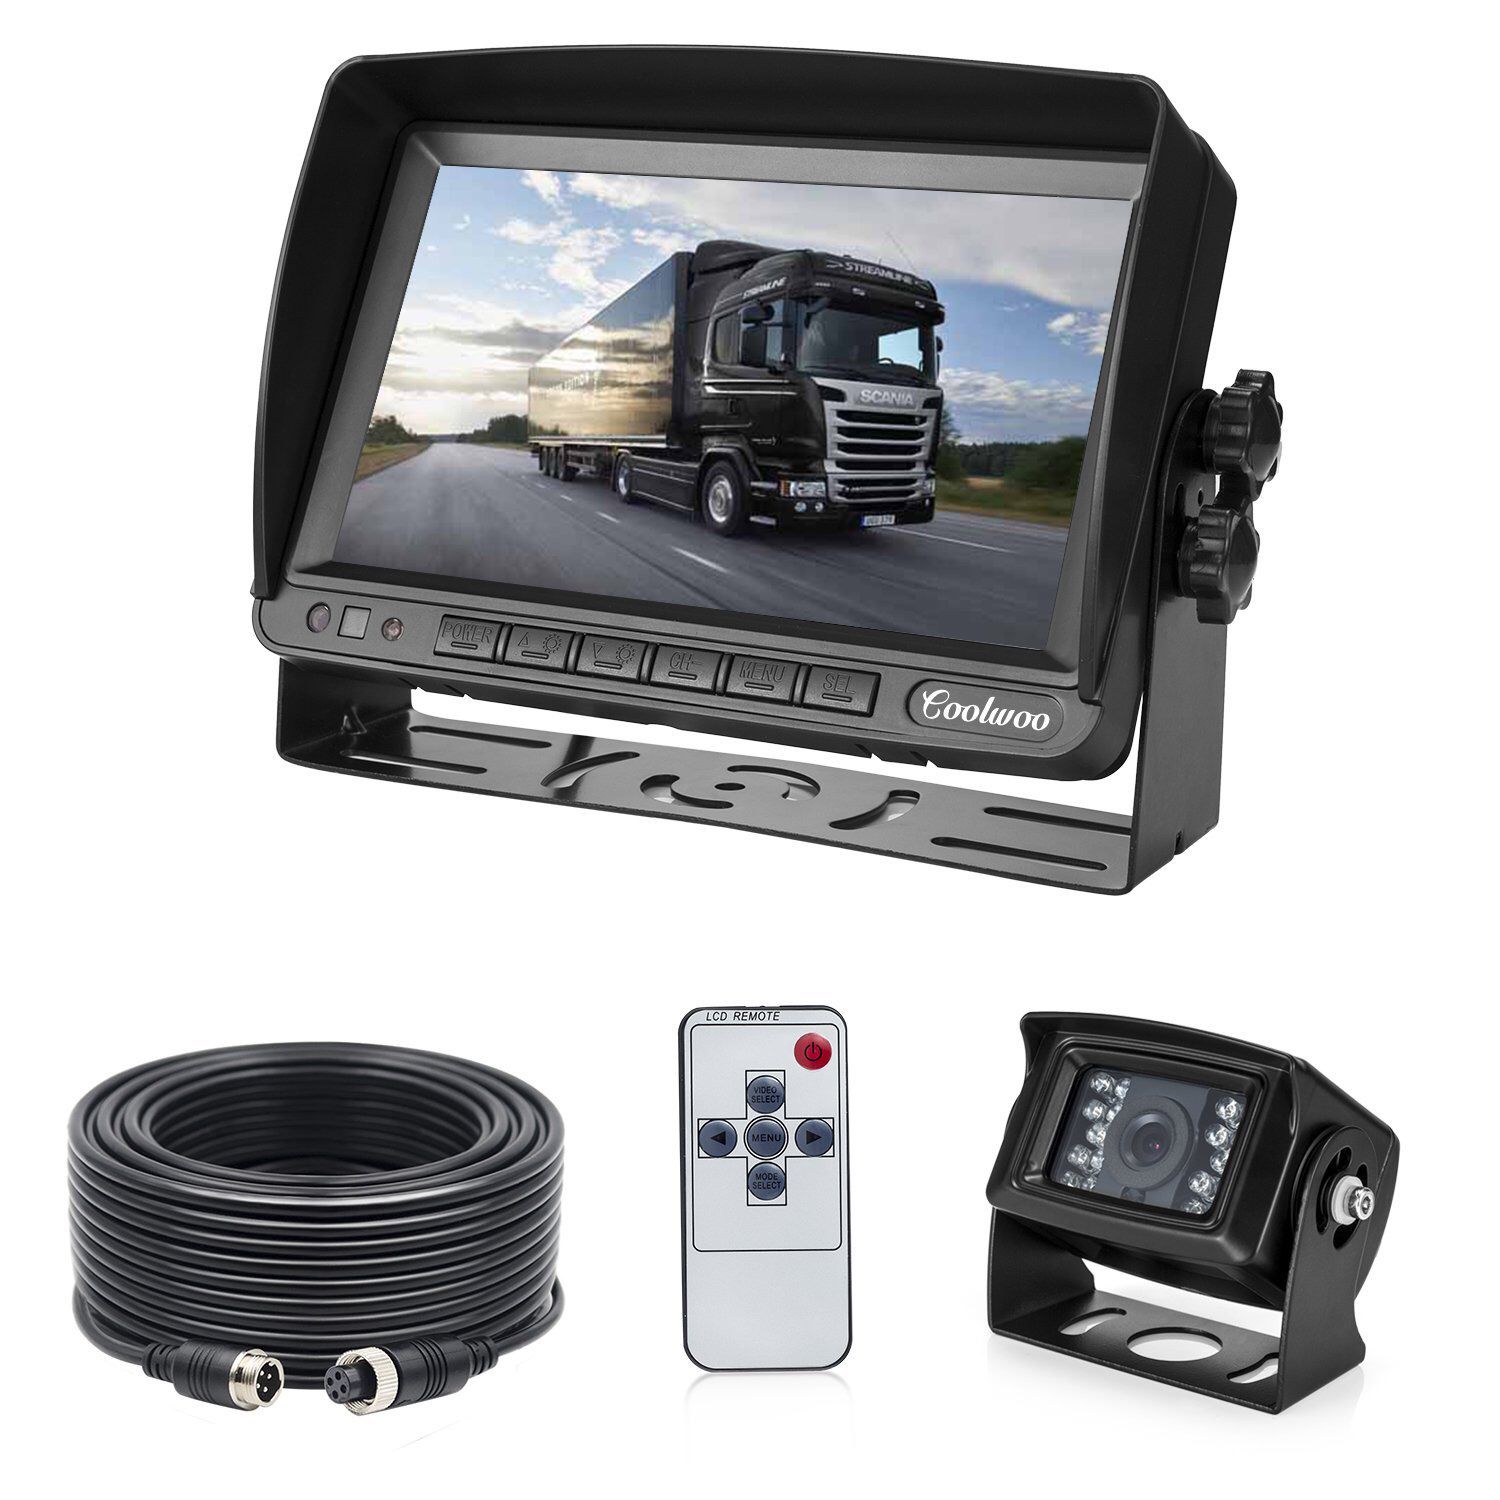 Backup Camera and Monitor Kit for Van, RV, Upgraded 175º Wide View Wired Infrared HD Small Rear View Cam with 7 inch Adjustable Monitor for Truck, Tr